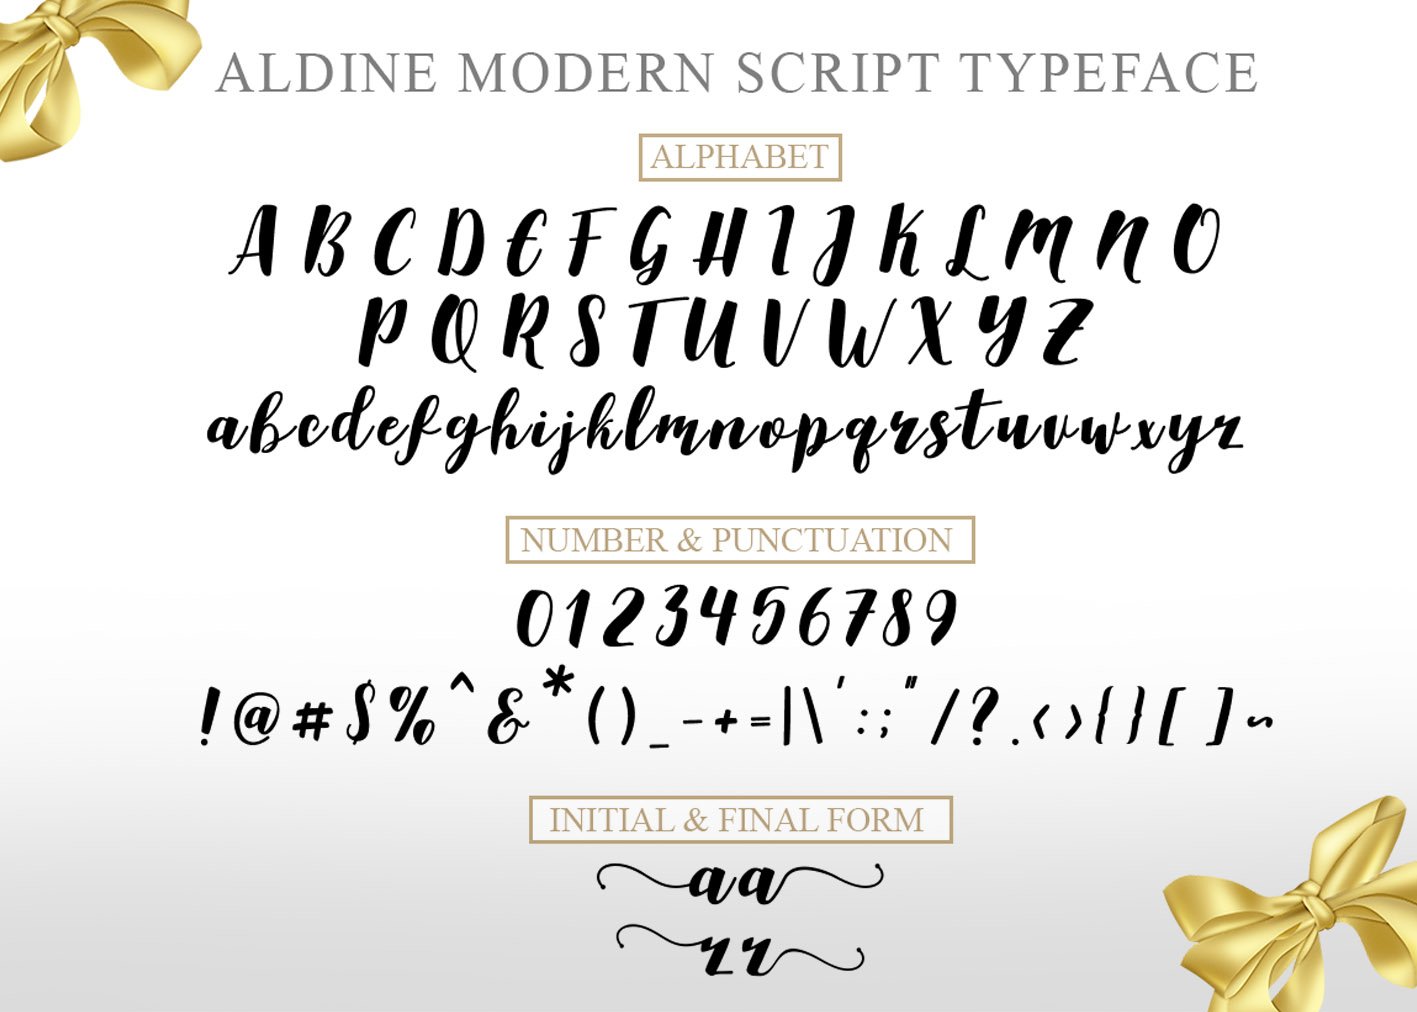 A general version of the font with all its features.